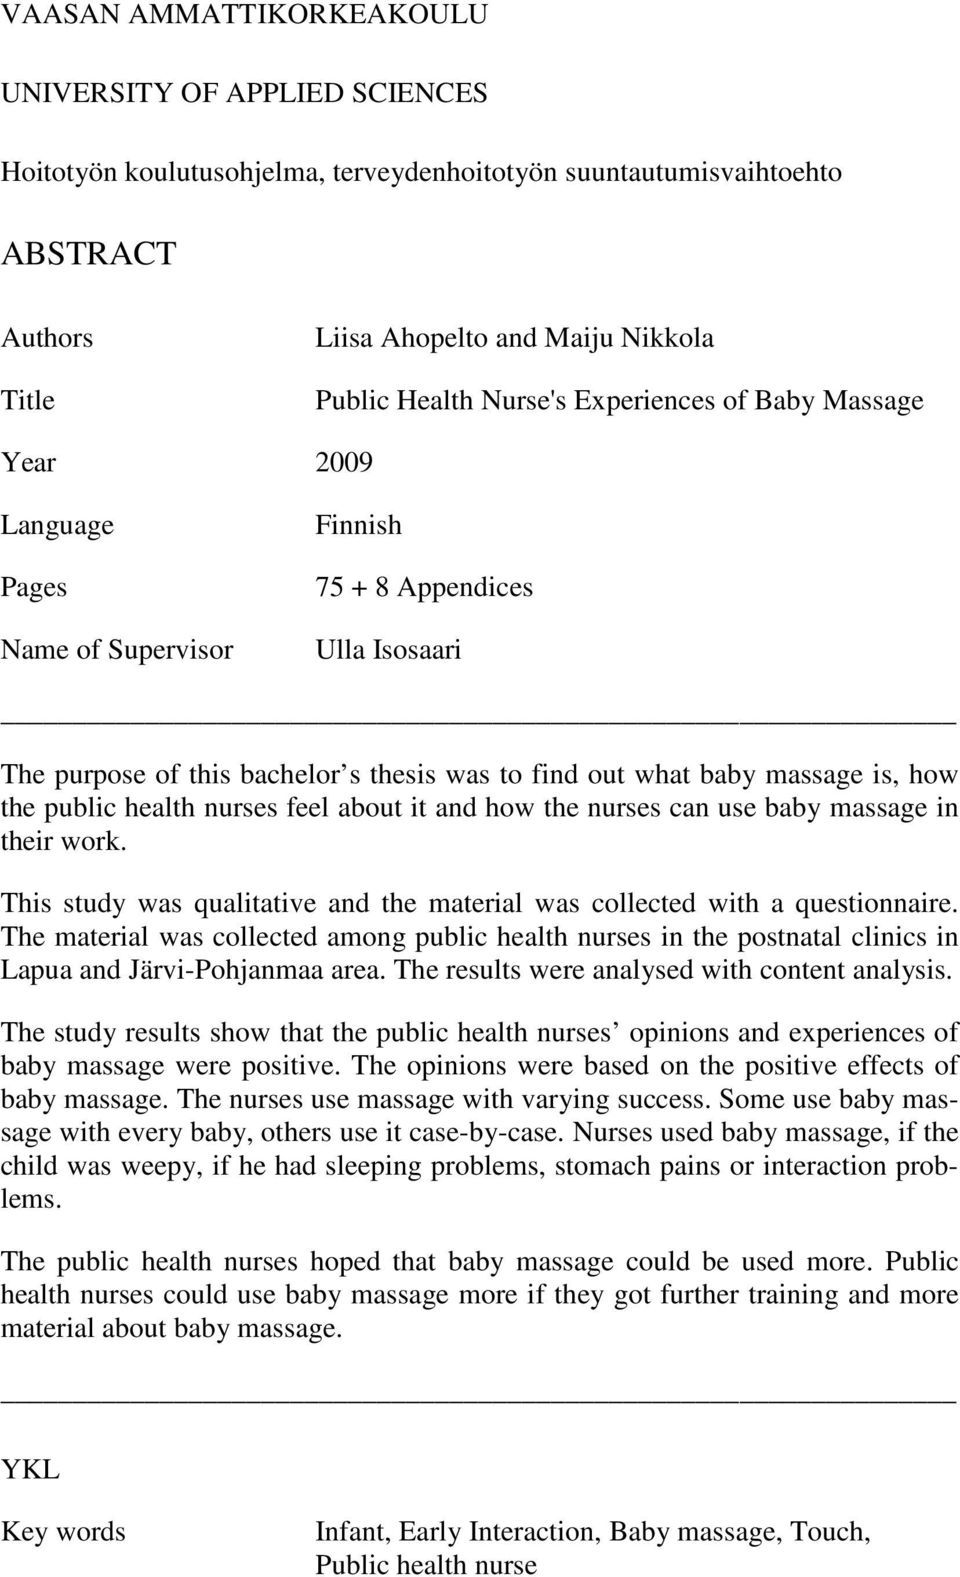 the public health nurses feel about it and how the nurses can use baby massage in their work. This study was qualitative and the material was collected with a questionnaire.